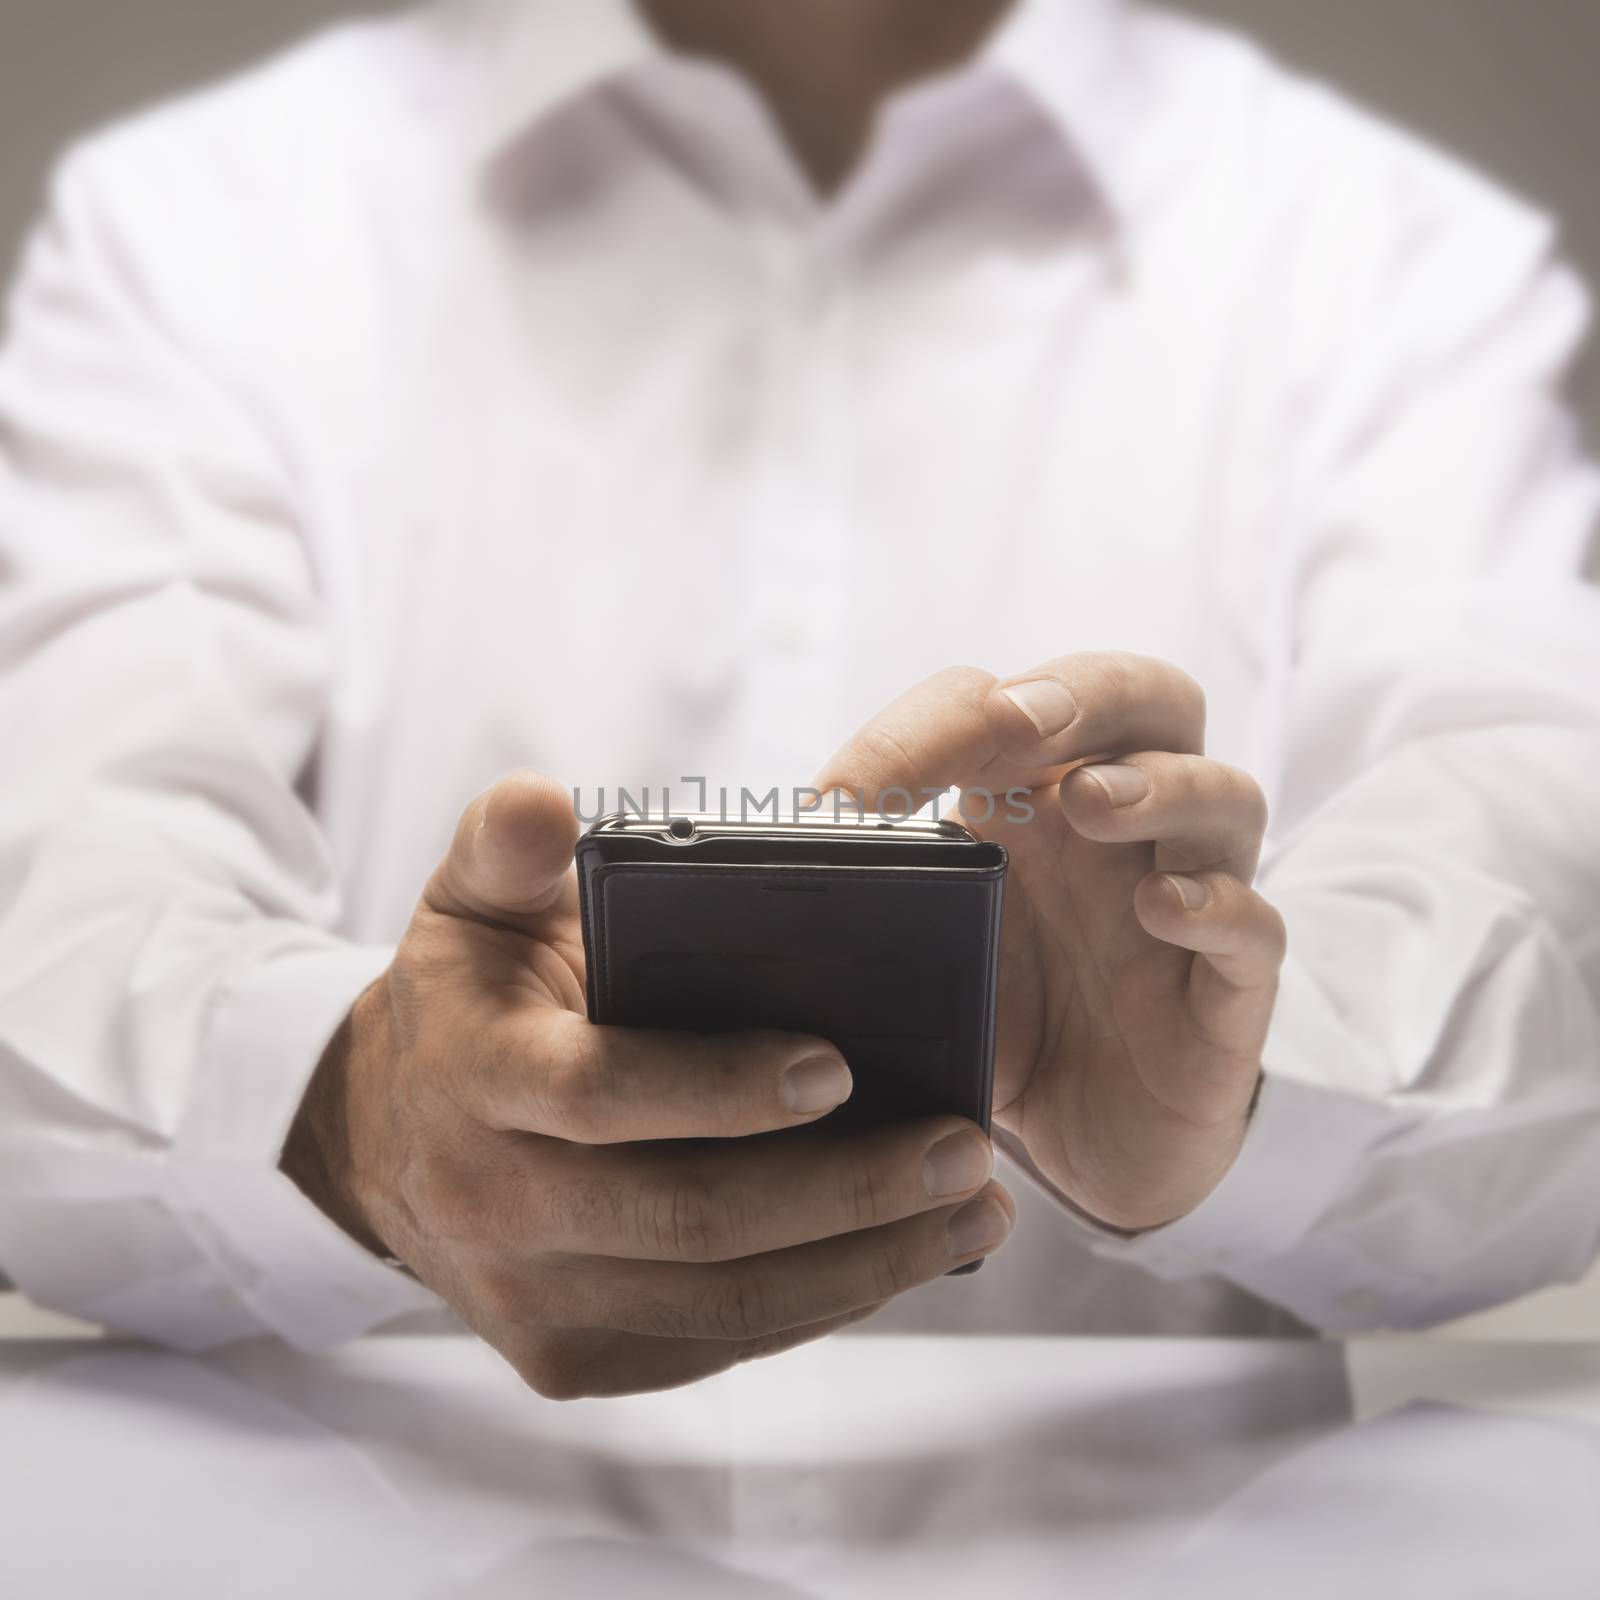 One smartphone in hands of a businessman wearing a white shirt 